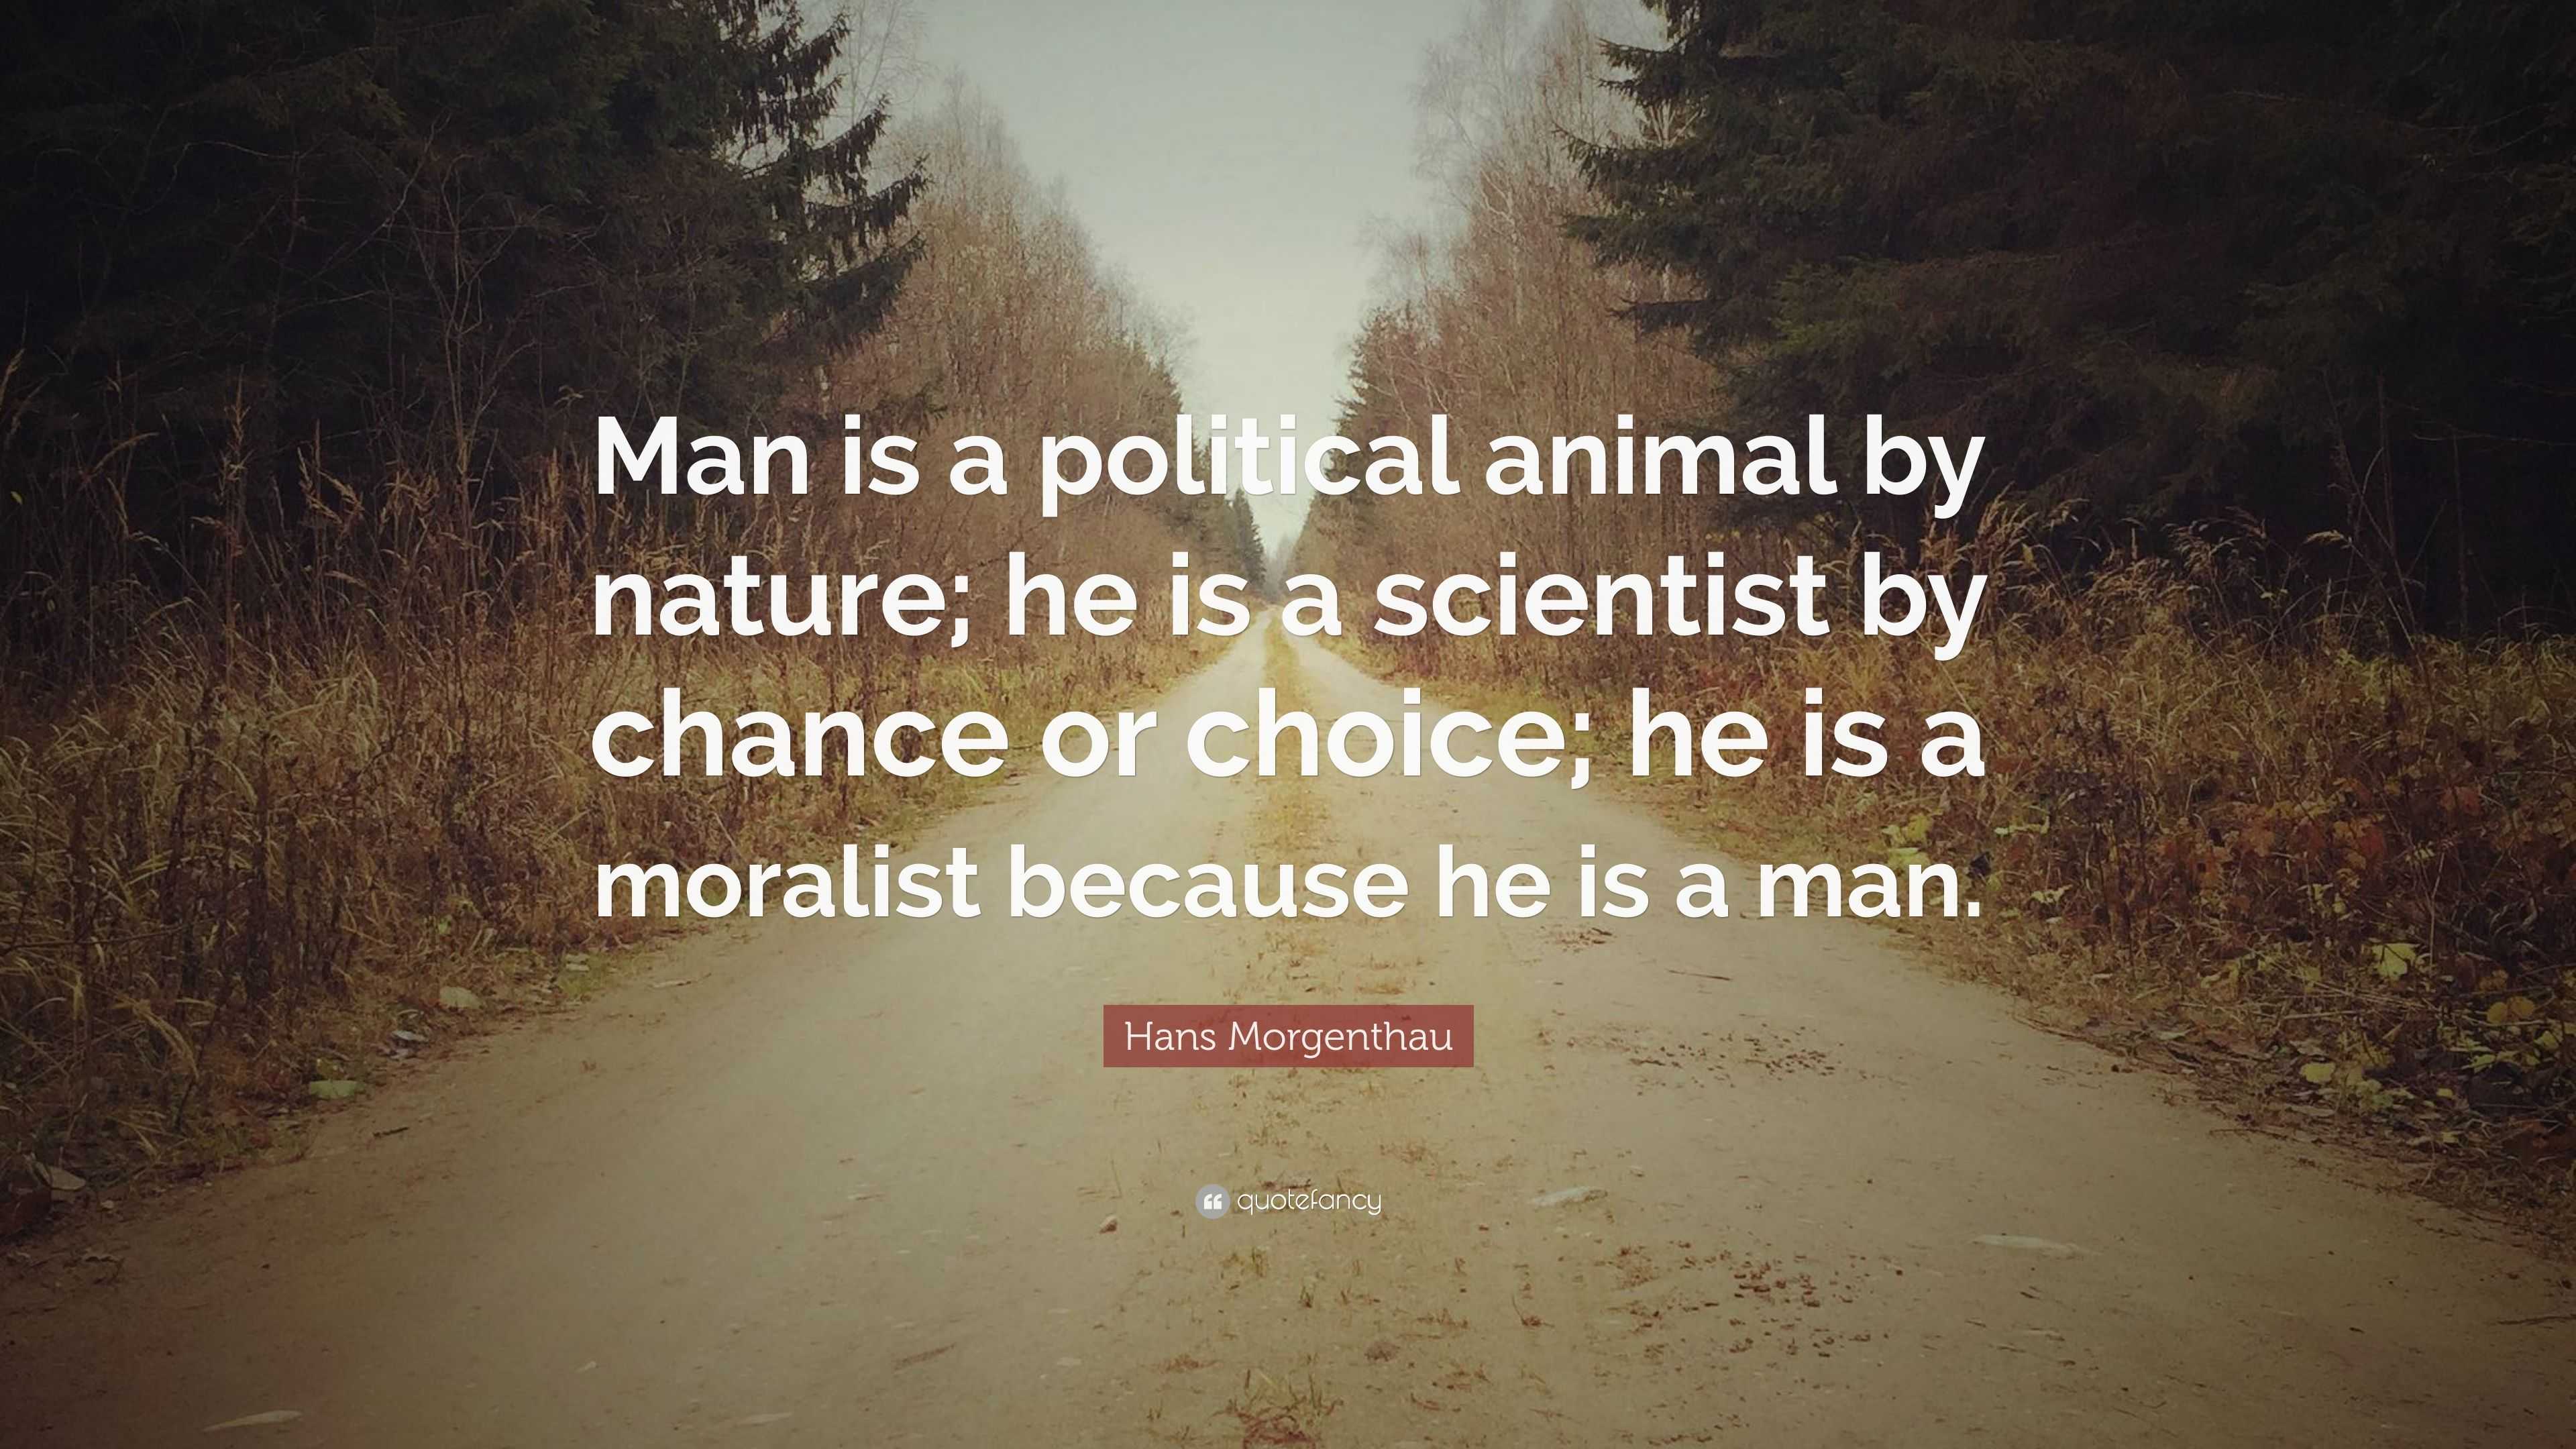 Hans Morgenthau Quote: “Man is a political animal by nature; he is a  scientist by chance